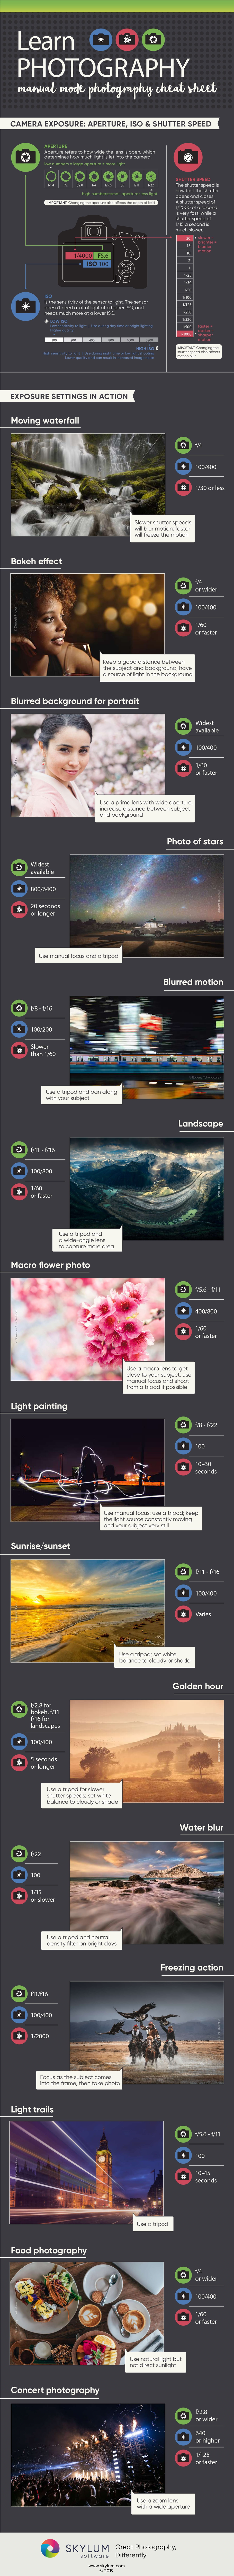 How to Take Photos in Manual Mode  Image1